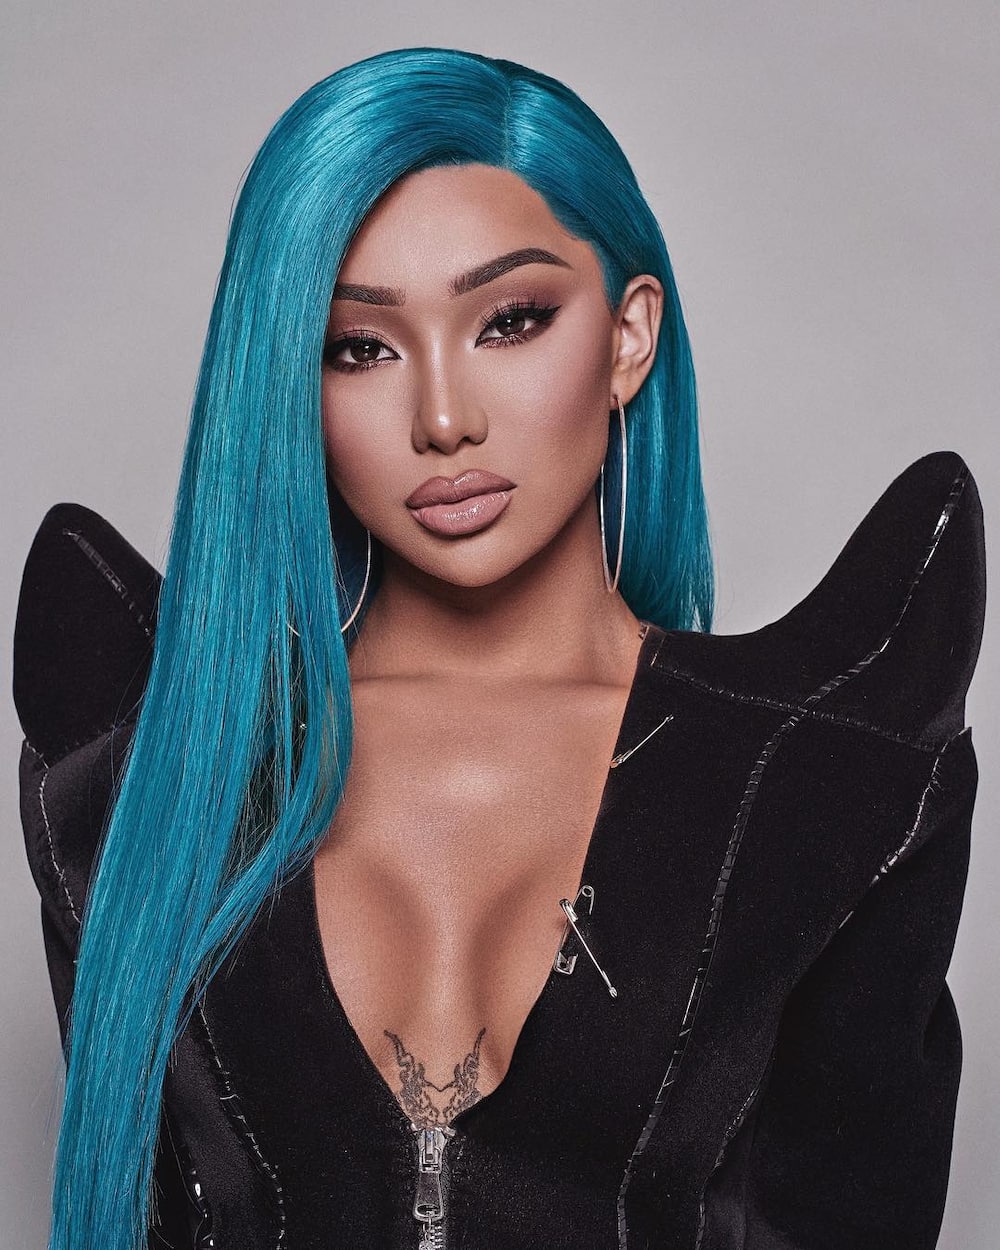 Nikita Dragun before and after photos: Is she trans?